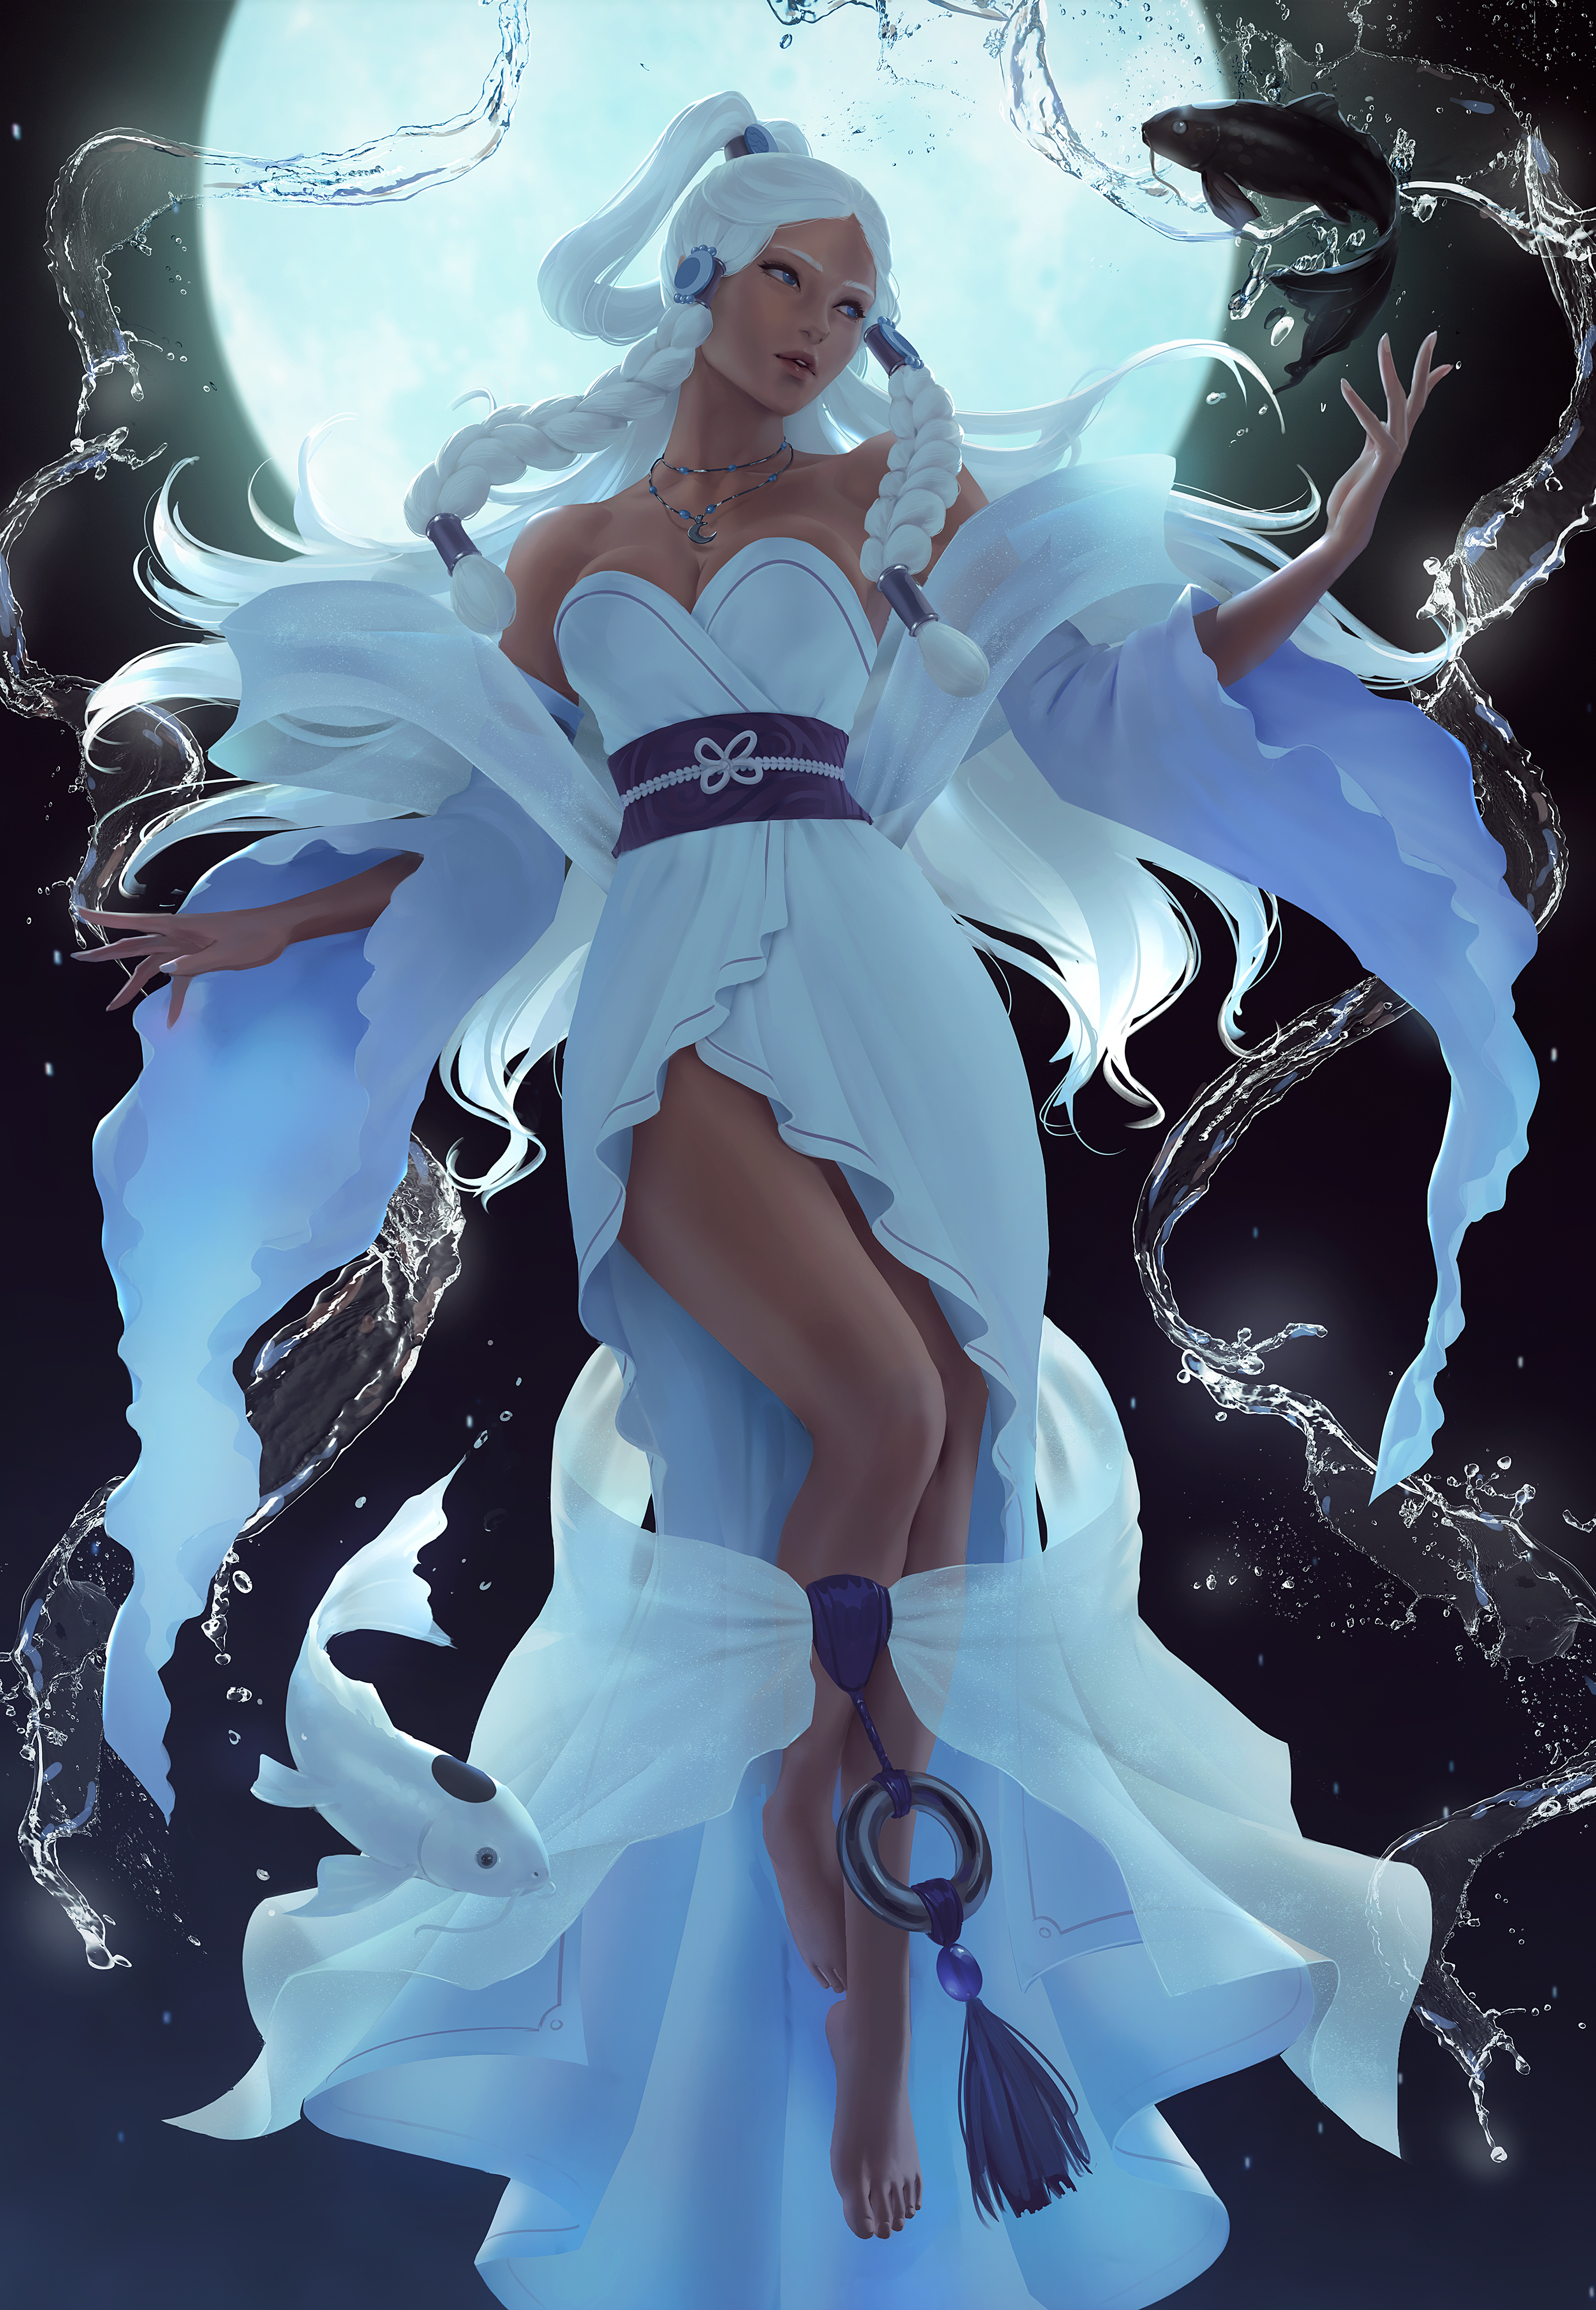 General 2764x4000 Princess Yue Avatar: The Last Airbender fictional character animated series moonlight braids white hair bare shoulders dress artwork 2D drawing fan art Zarory